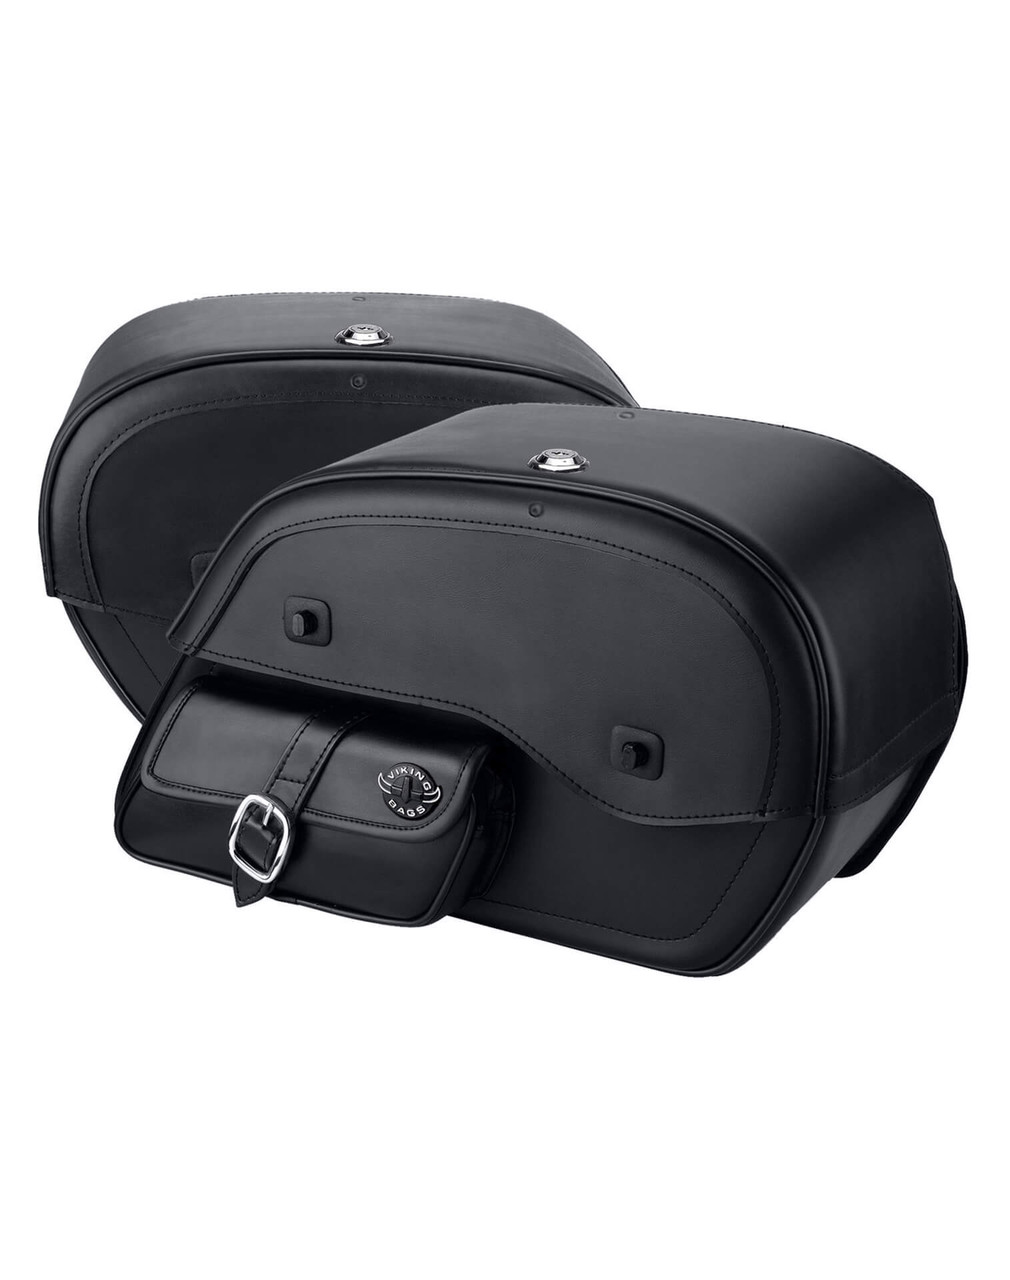 Triumph Thunderbird Viking Charger Side Pocket With Shock Cutout Motorcycle Saddlebags Both Bags View